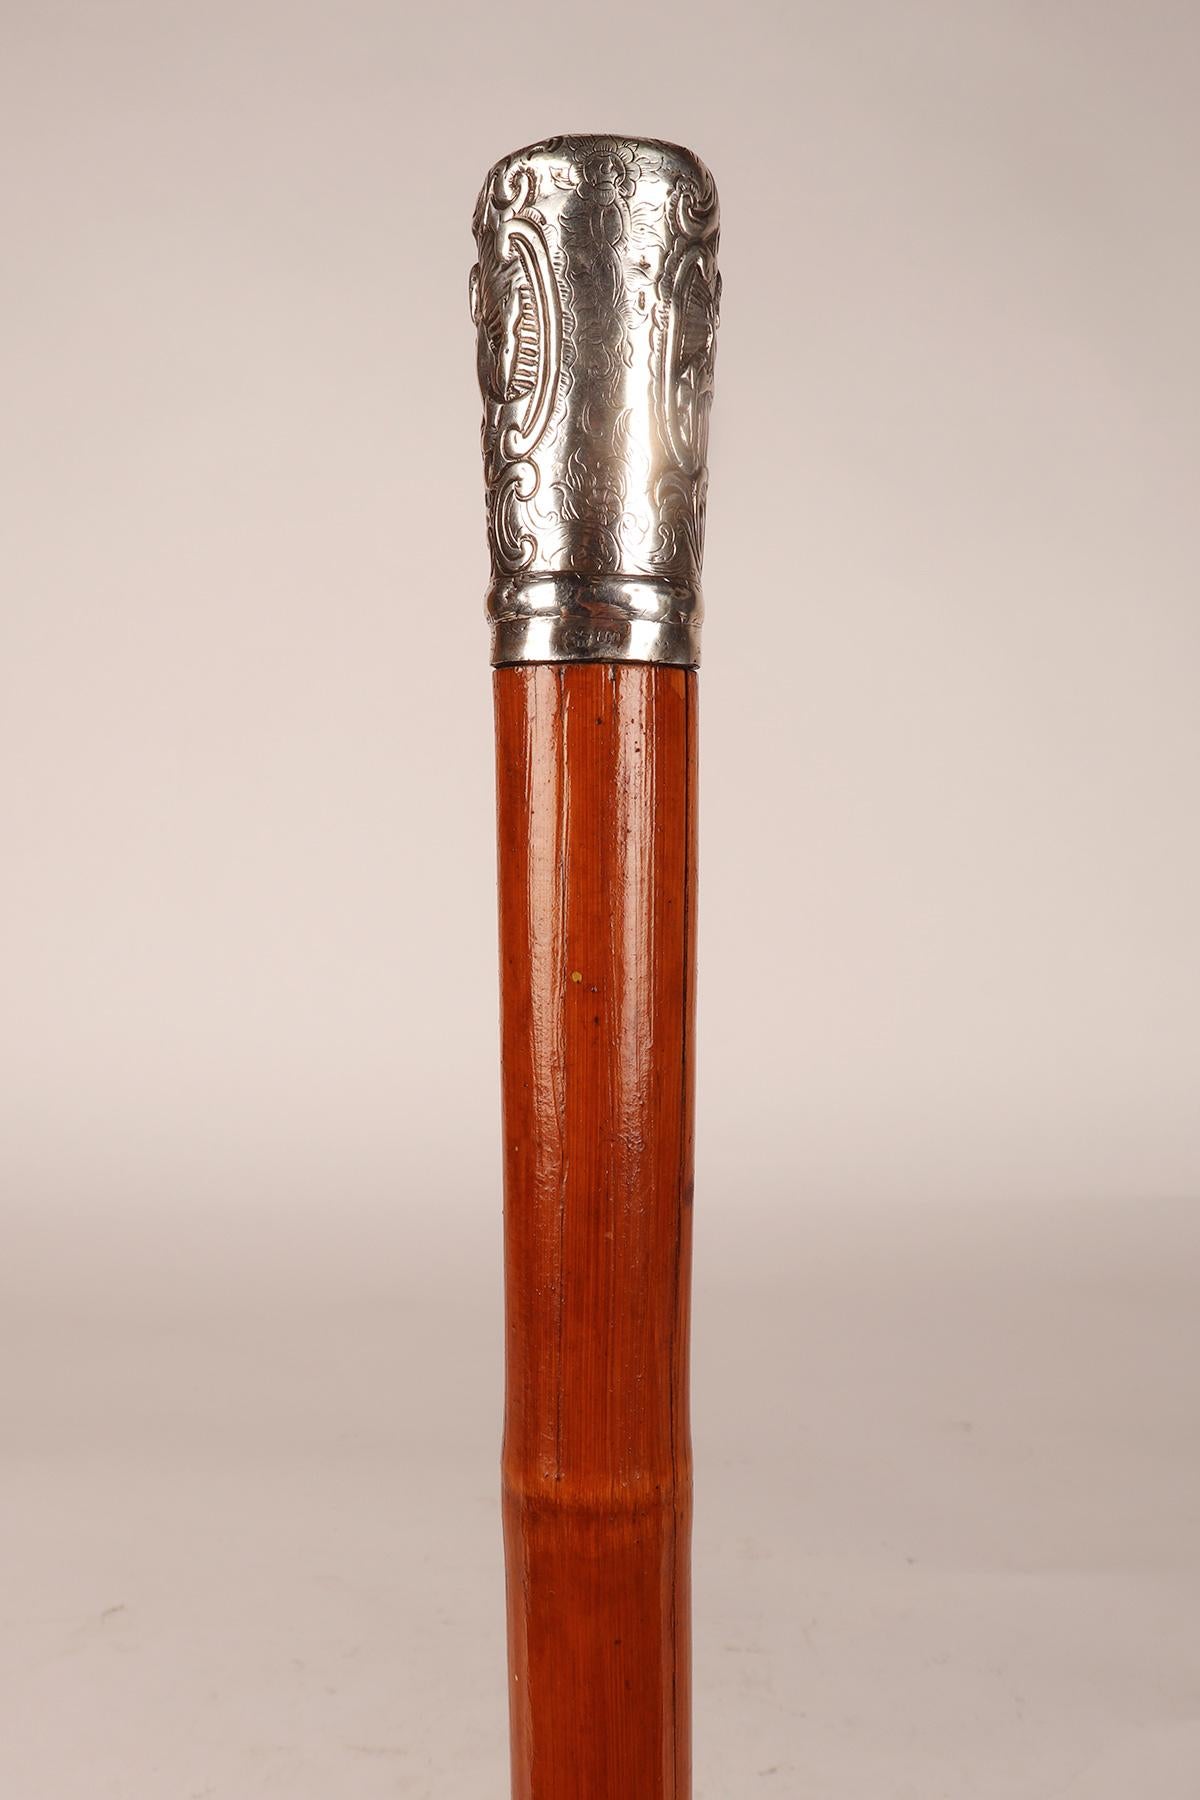 Customs officer's walking stick for goods inspection, Germany, 1870. For Sale 11